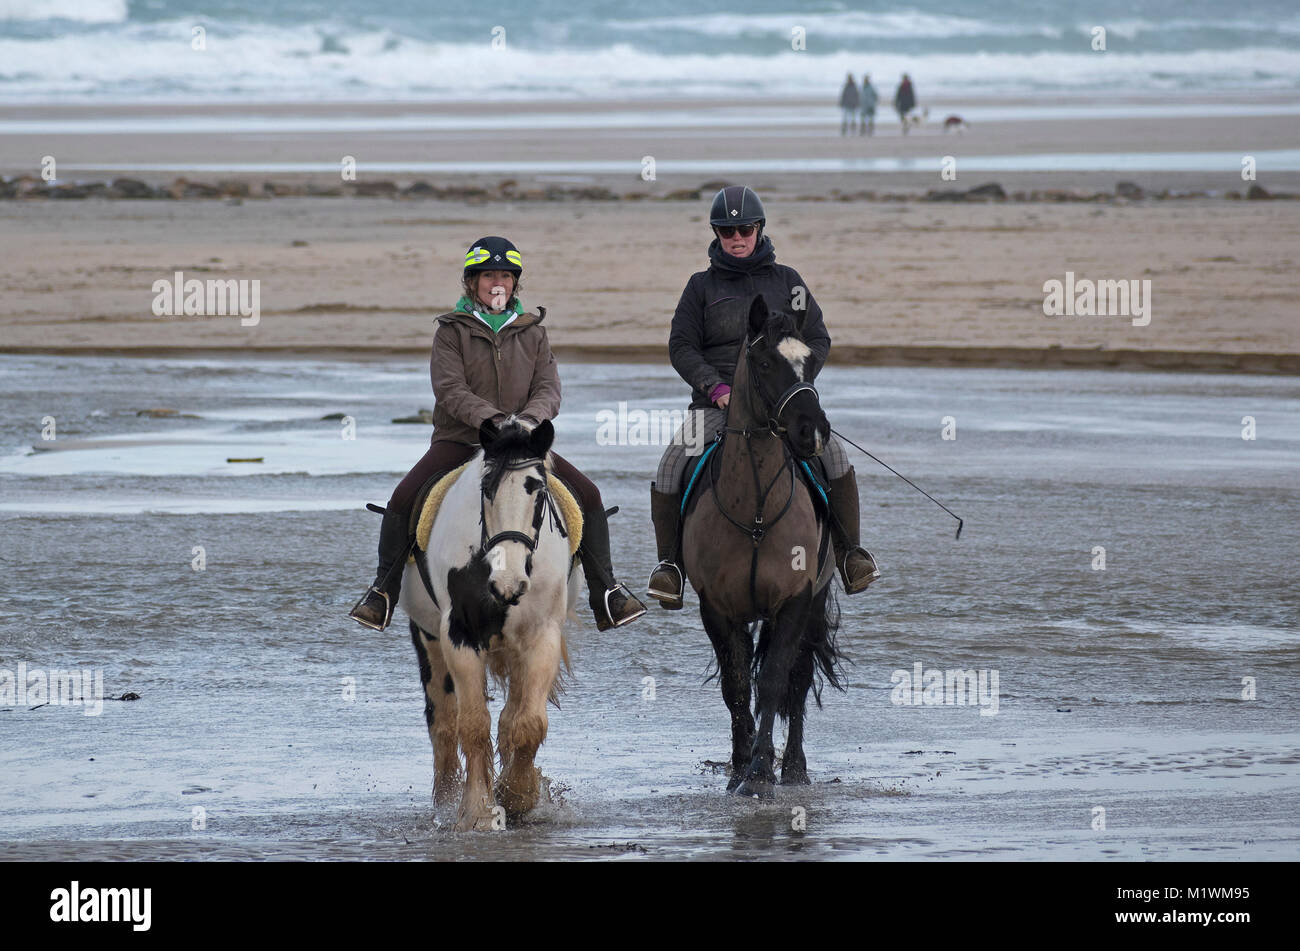 Perranporth beach, Cornwall, 2nd Feb 2018. UK Weather. A low tide and light winds made for ideal riding conditions on the beach at Perranporth in Cornwall. Credit: Kevin Britland/Alamy Live News Stock Photo